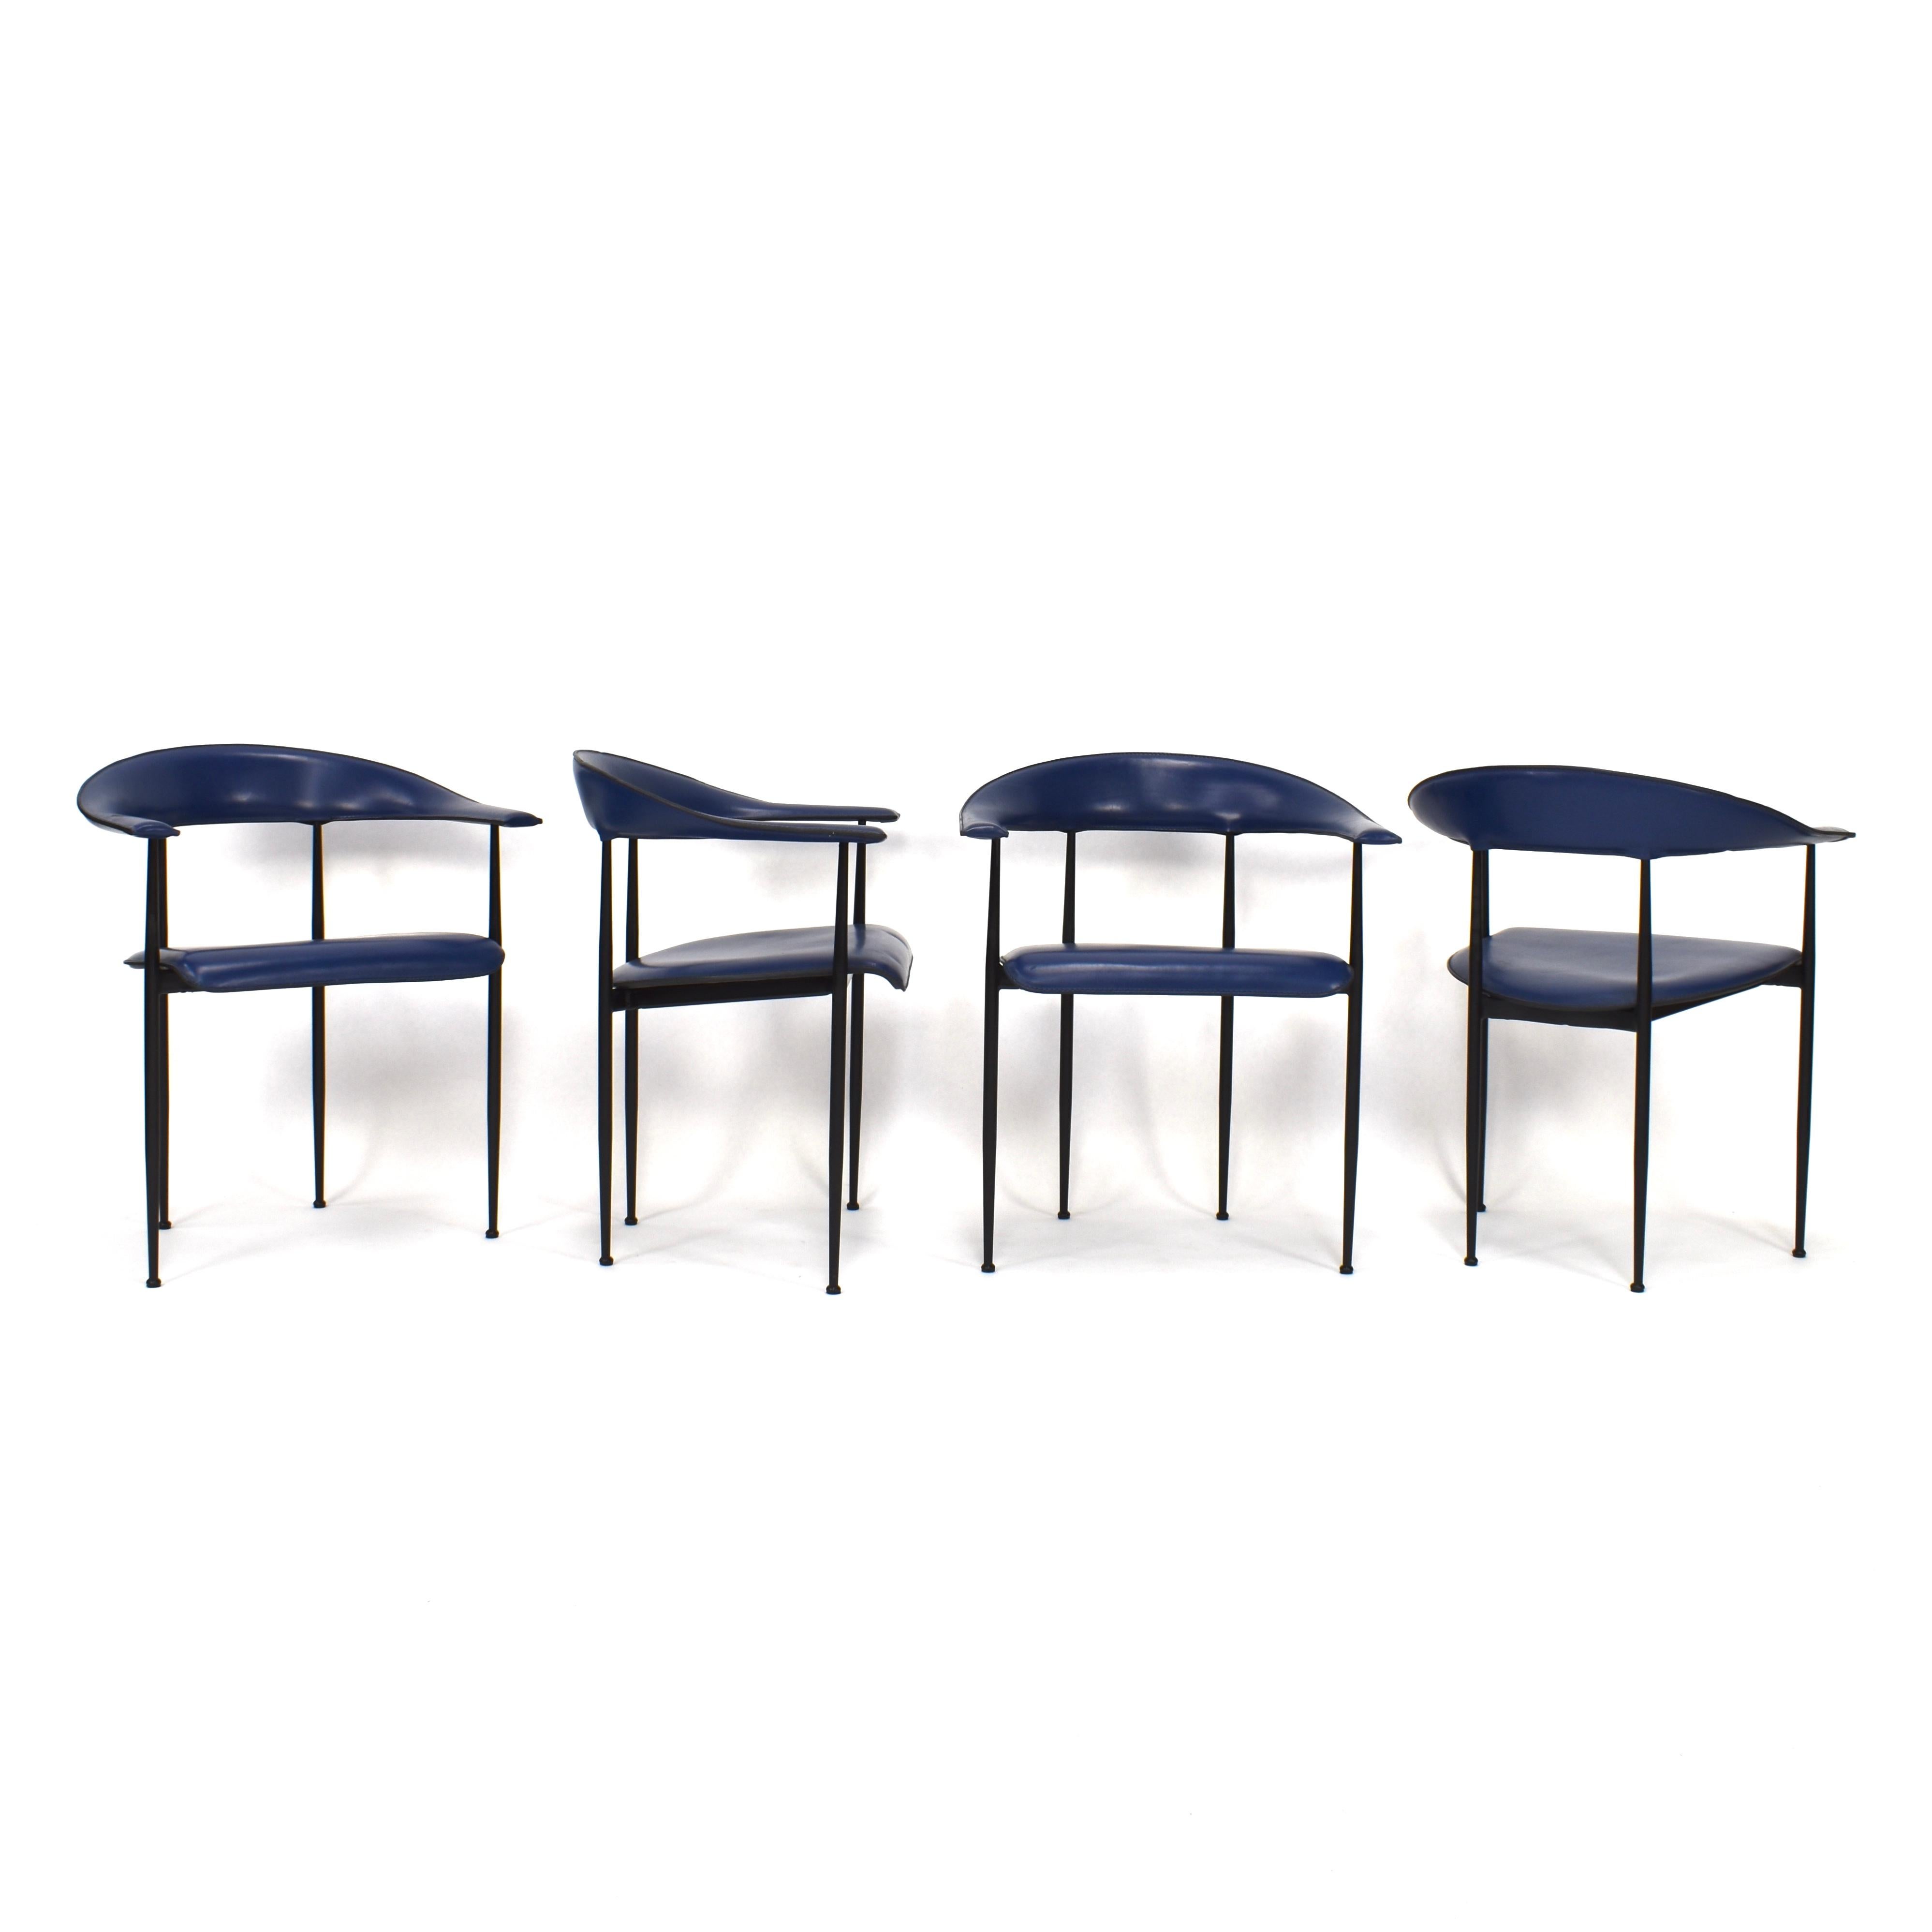 Set of four dark blue leather P40 dining chairs by FASEM Italy.

Designer: Giancarlo Vegni & Gianfranco Gualtierotti

Manufacturer: FASEM

Country: Italy

Model: P40 Dining chairs

Material: Black lacquered metal / Dark blue